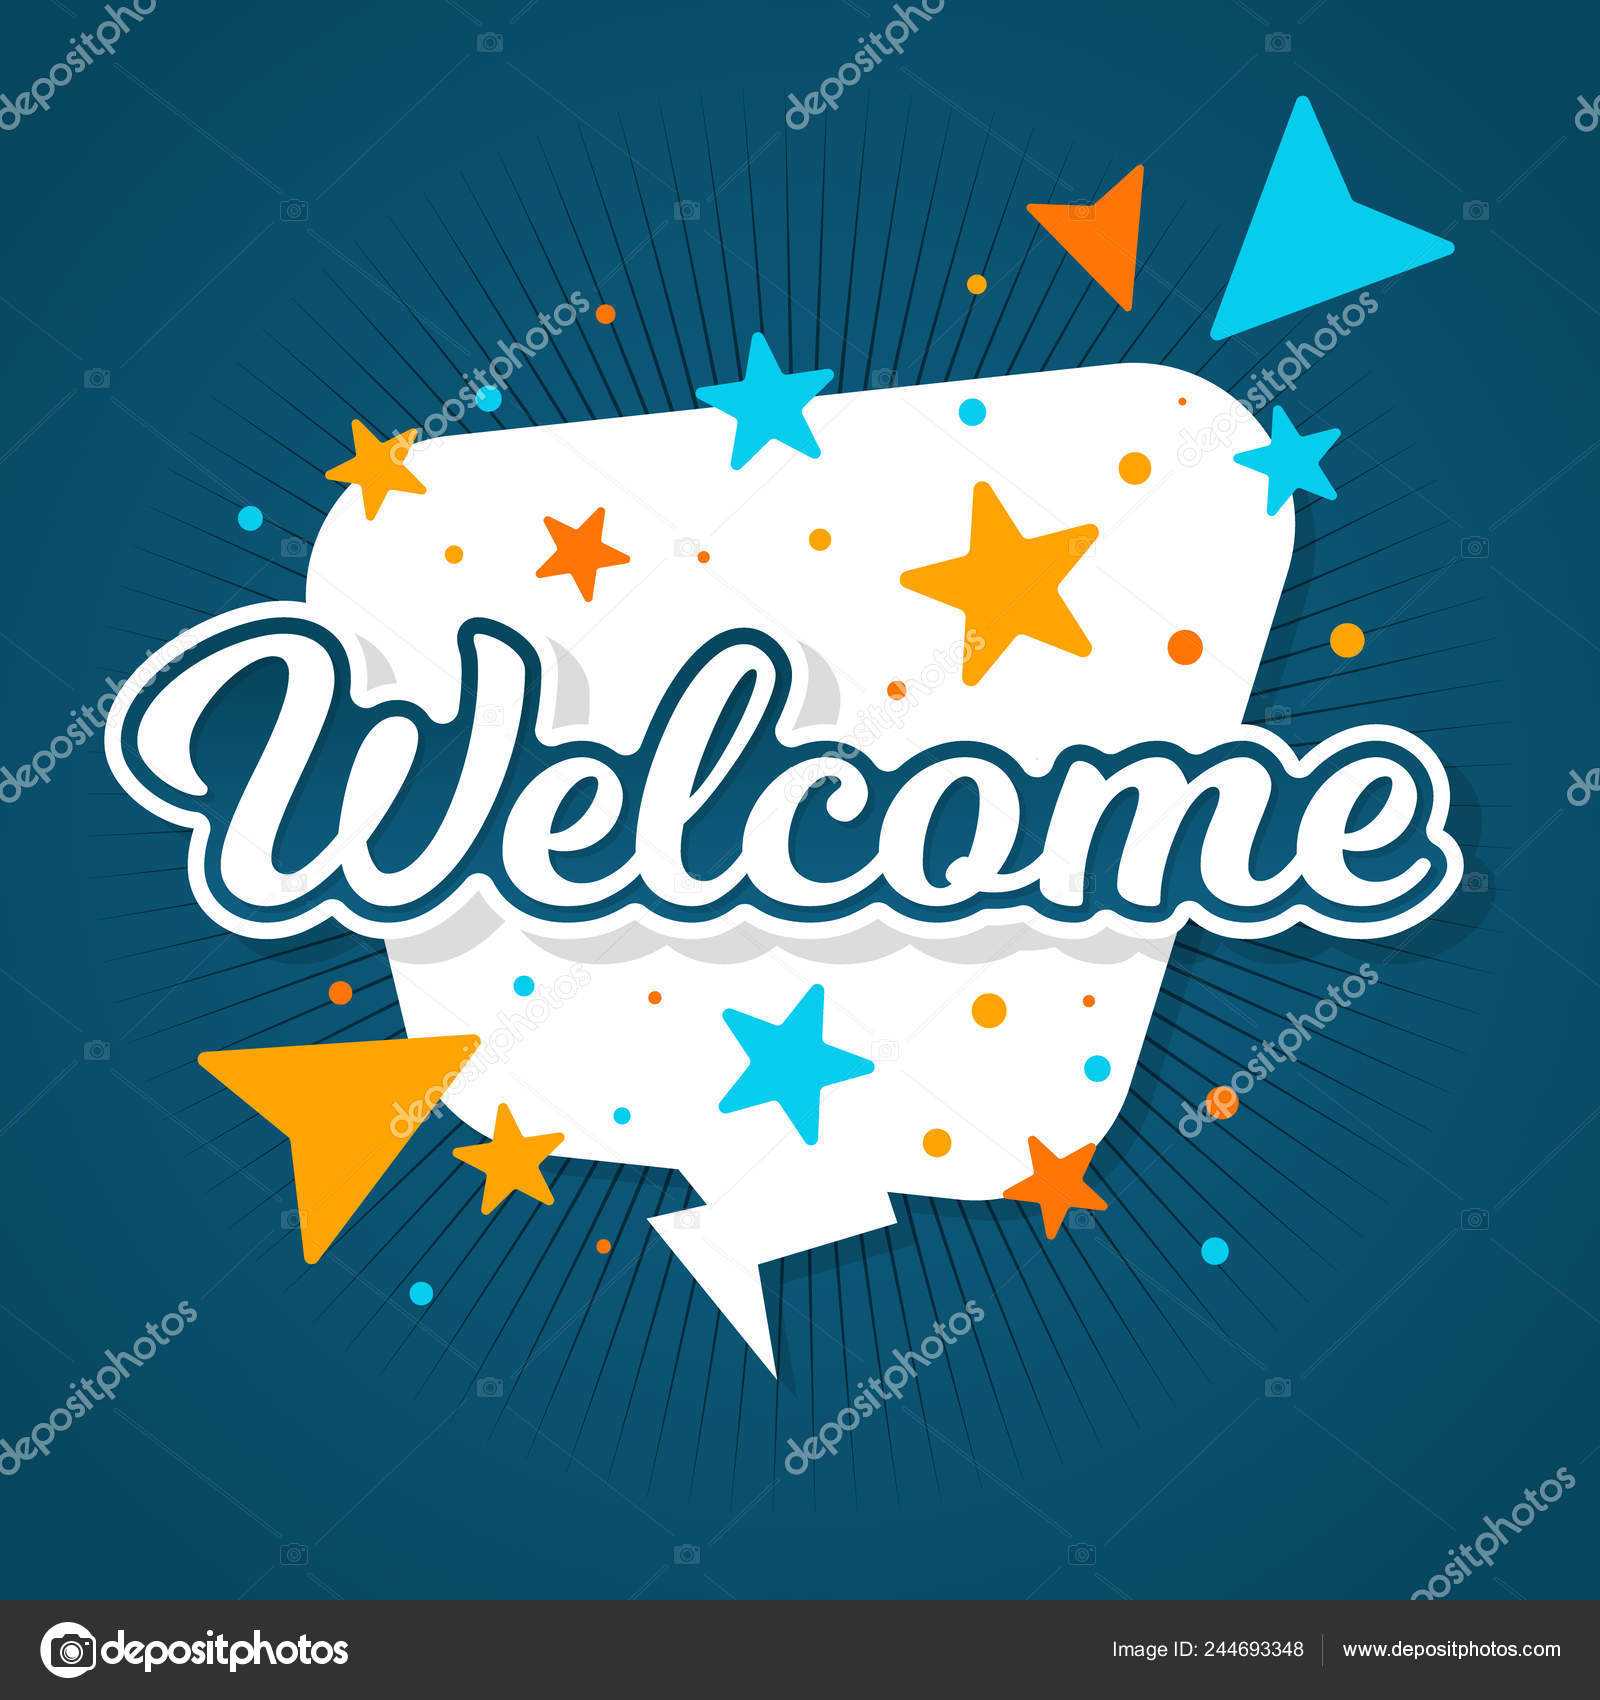 Welcome Letters Banner Flowing Liquid Shapes Template Design Pertaining To Welcome Banner Template